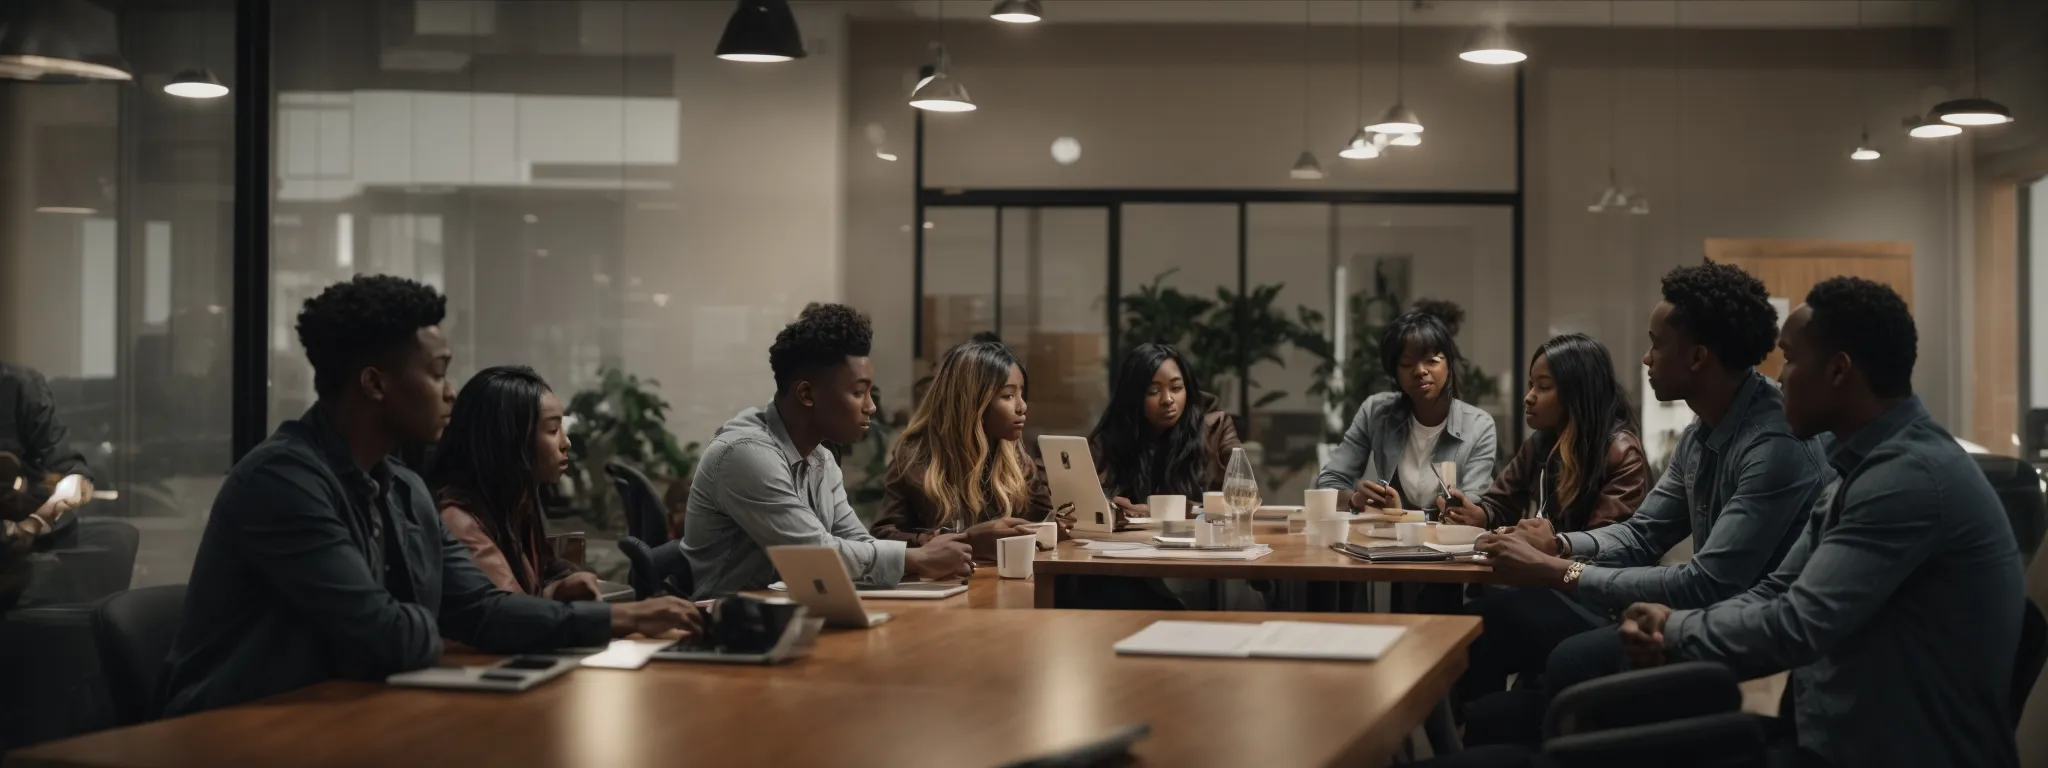 a dynamic, well-lit meeting room where a diverse group of creatives are brainstorming and strategizing around a table filled with various digital devices.